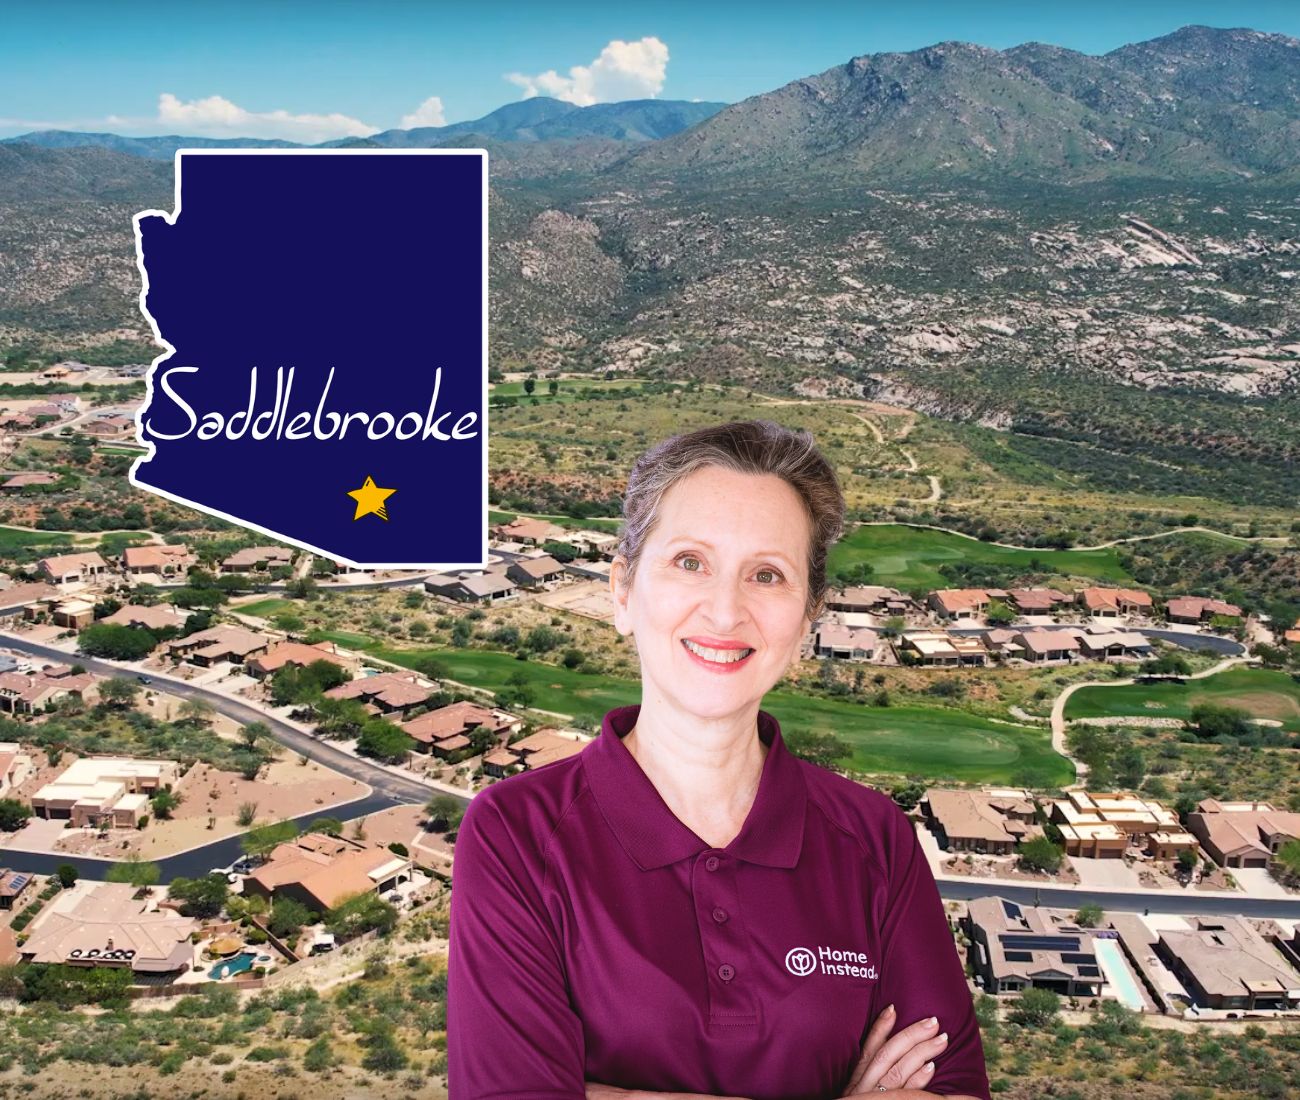 Home Instead caregiver with Saddlebrooke Arizona in the background